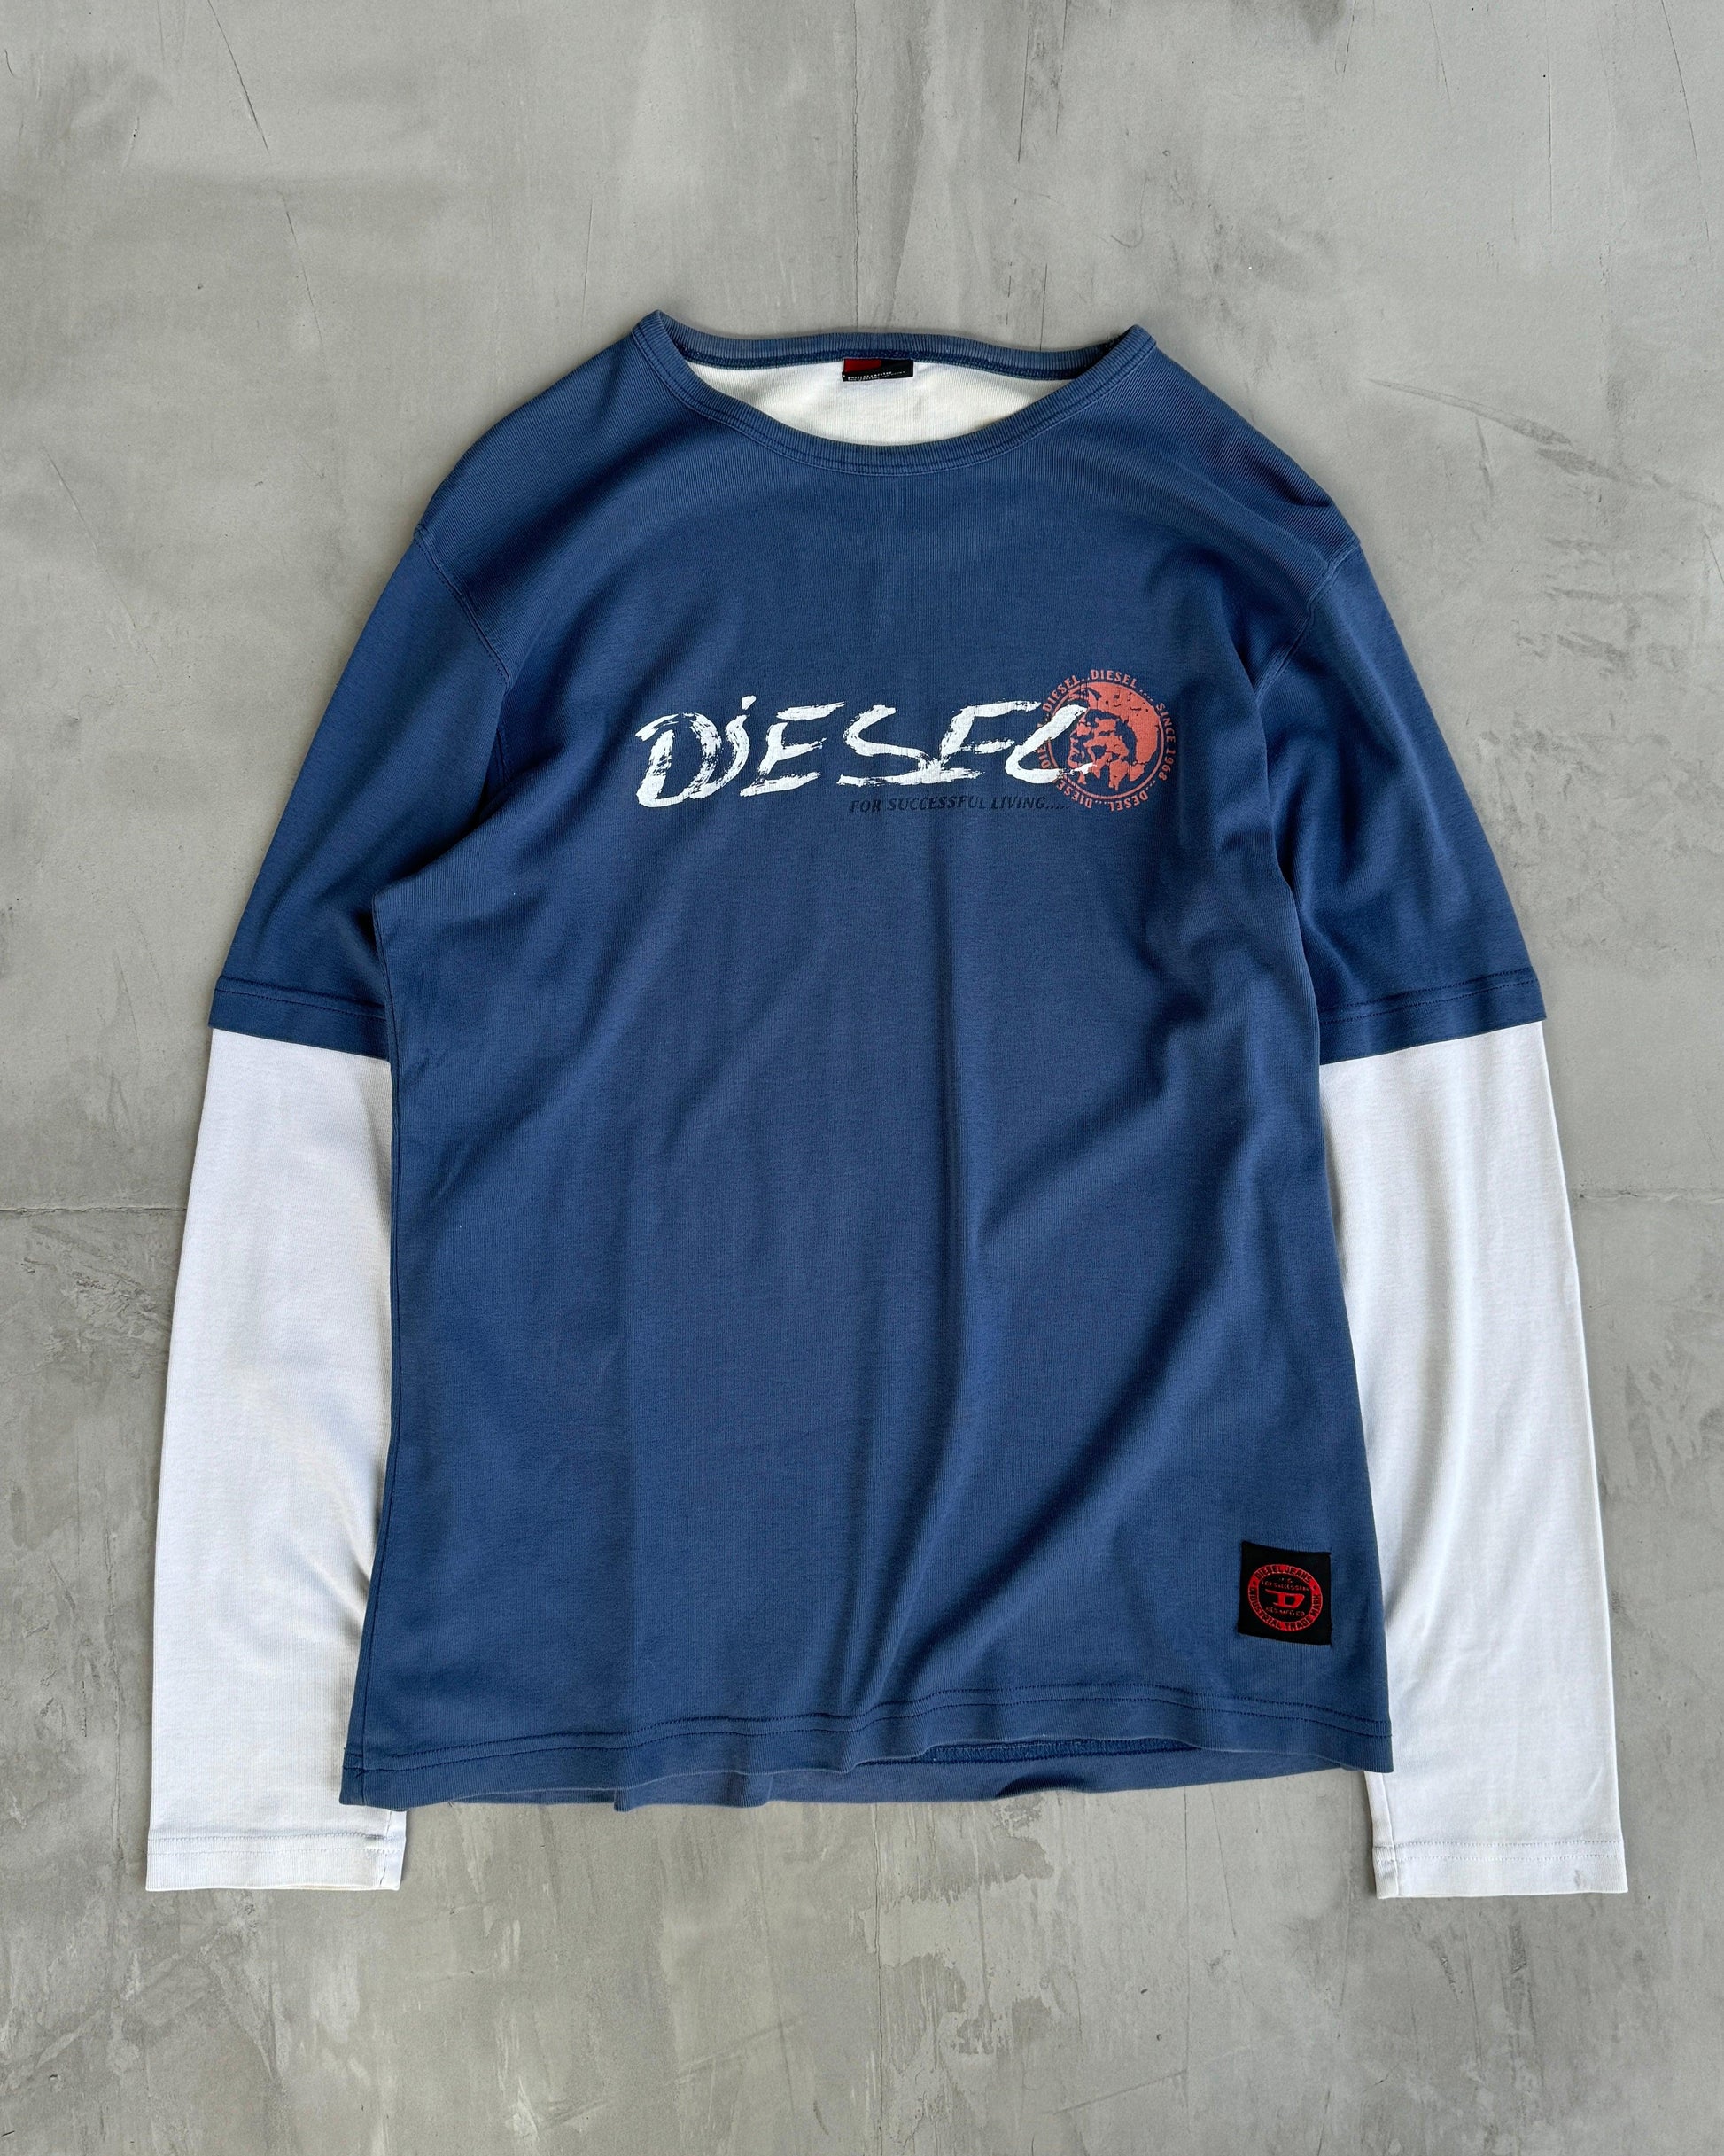 DIESEL 2000'S DOUBLE LAYERED LONG SLEEVE TOP - L - Known Source